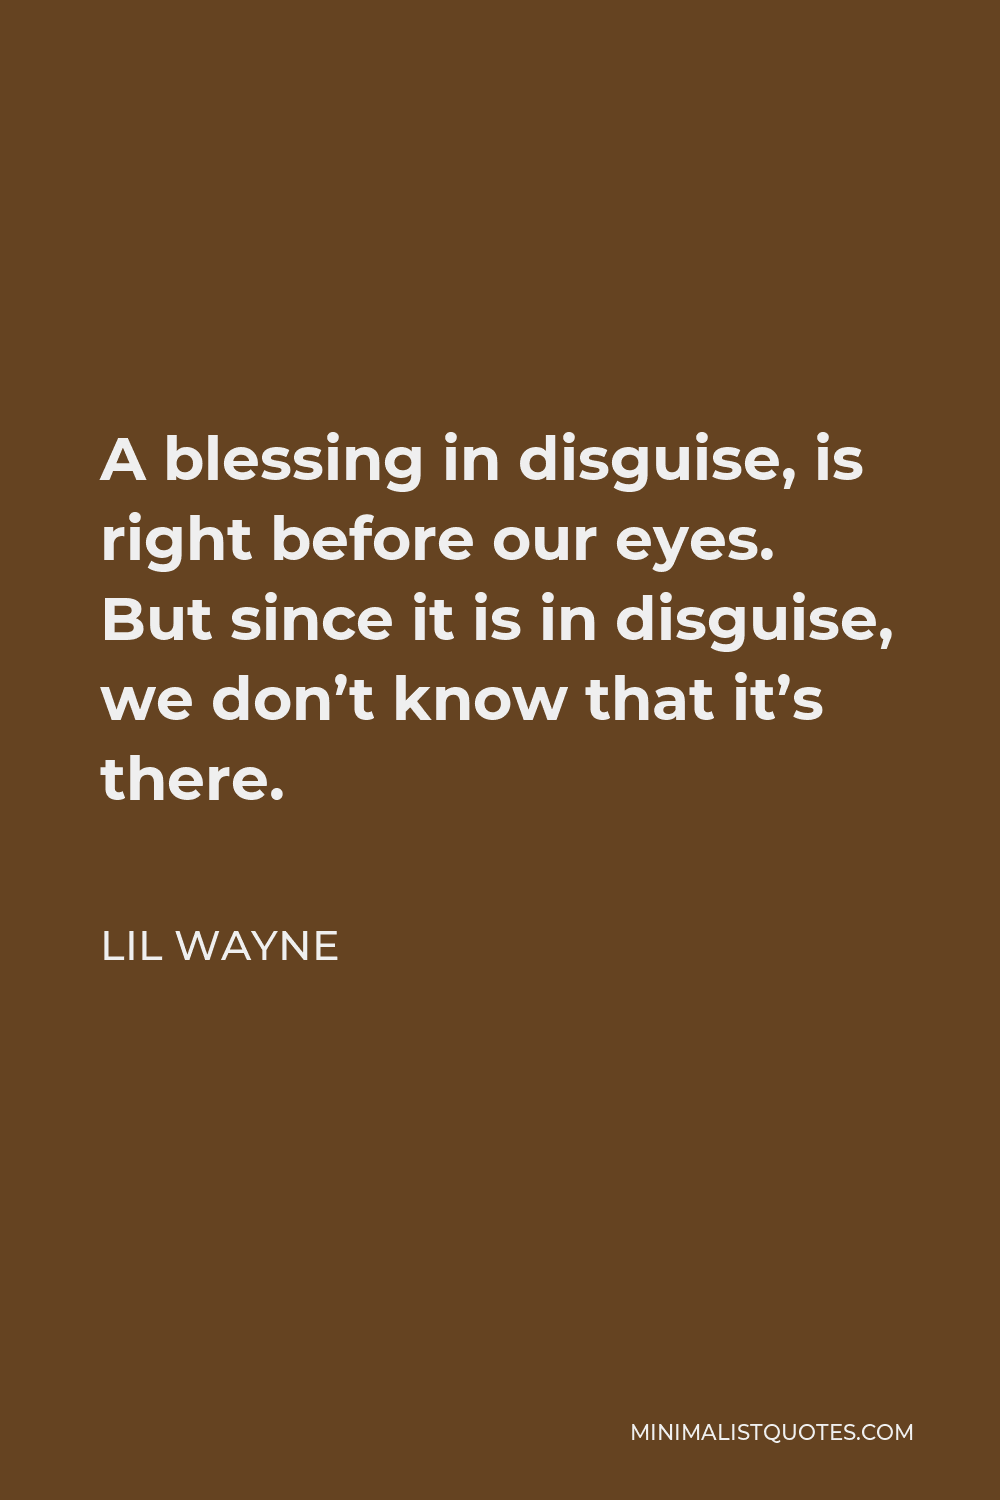 Lil Wayne Quote - A blessing in disguise, is right before our eyes. But since it is in disguise, we don’t know that it’s there.